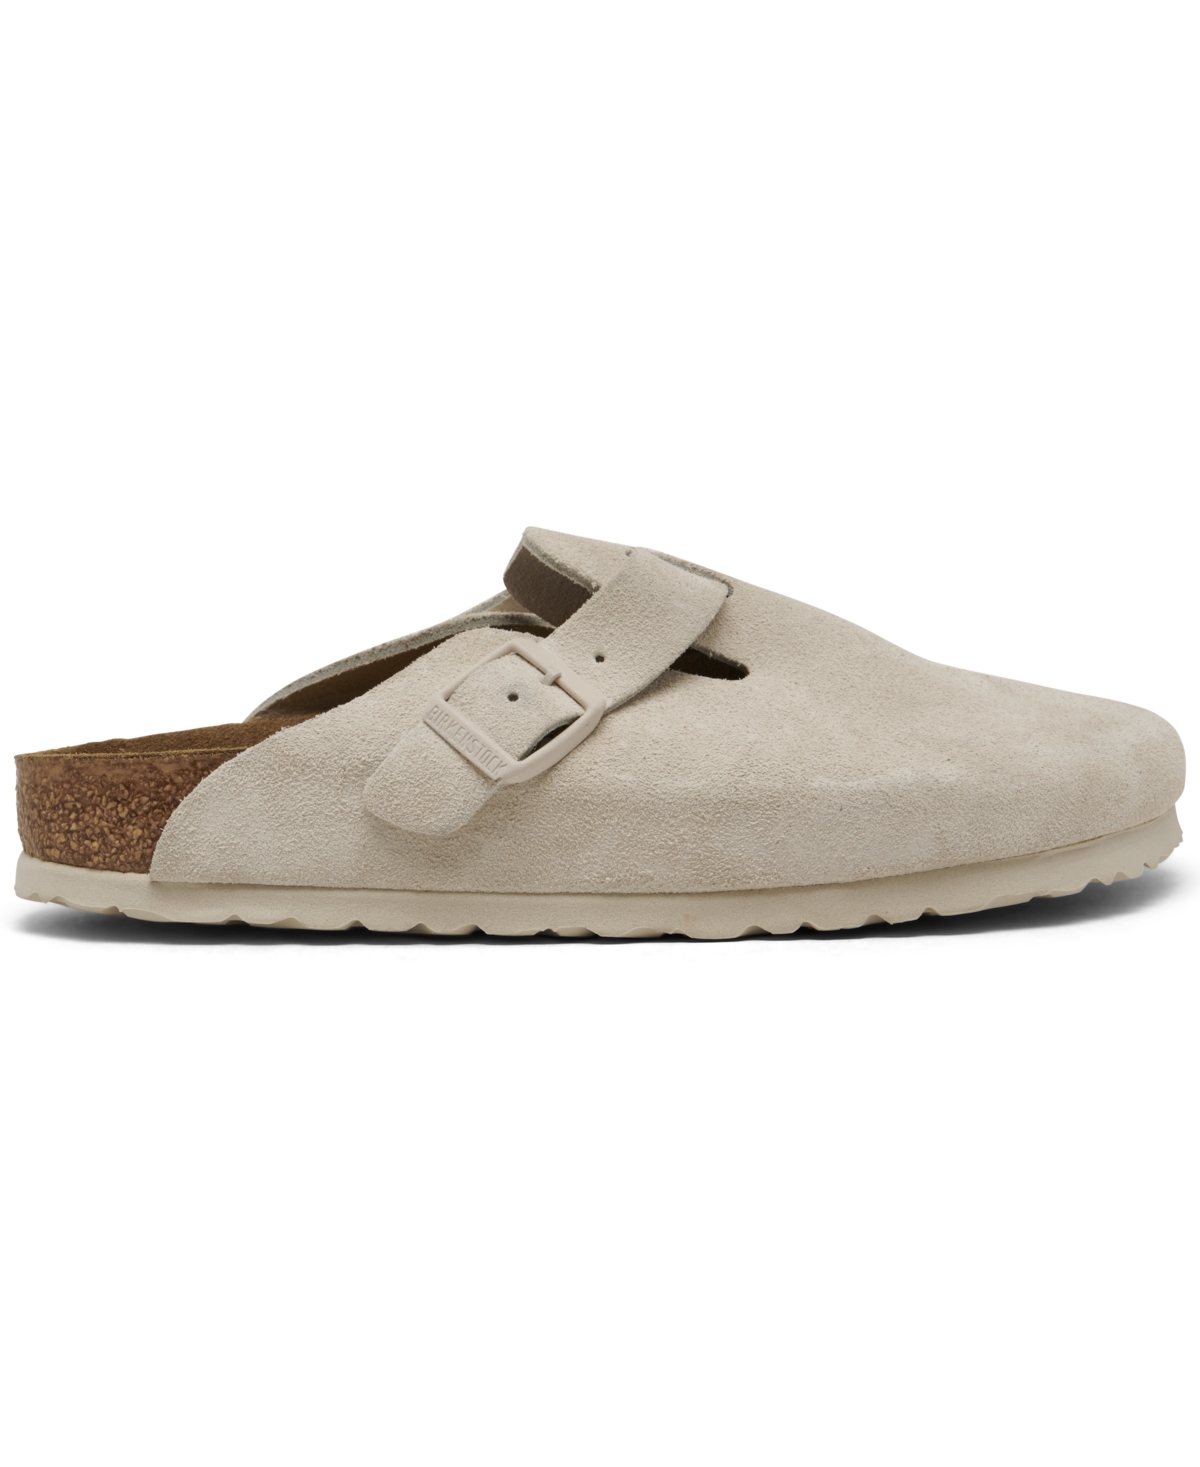 Shop Birkenstock Women's Boston Soft Footbed Suede Leather Clogs From Finish Line In Antique-like White